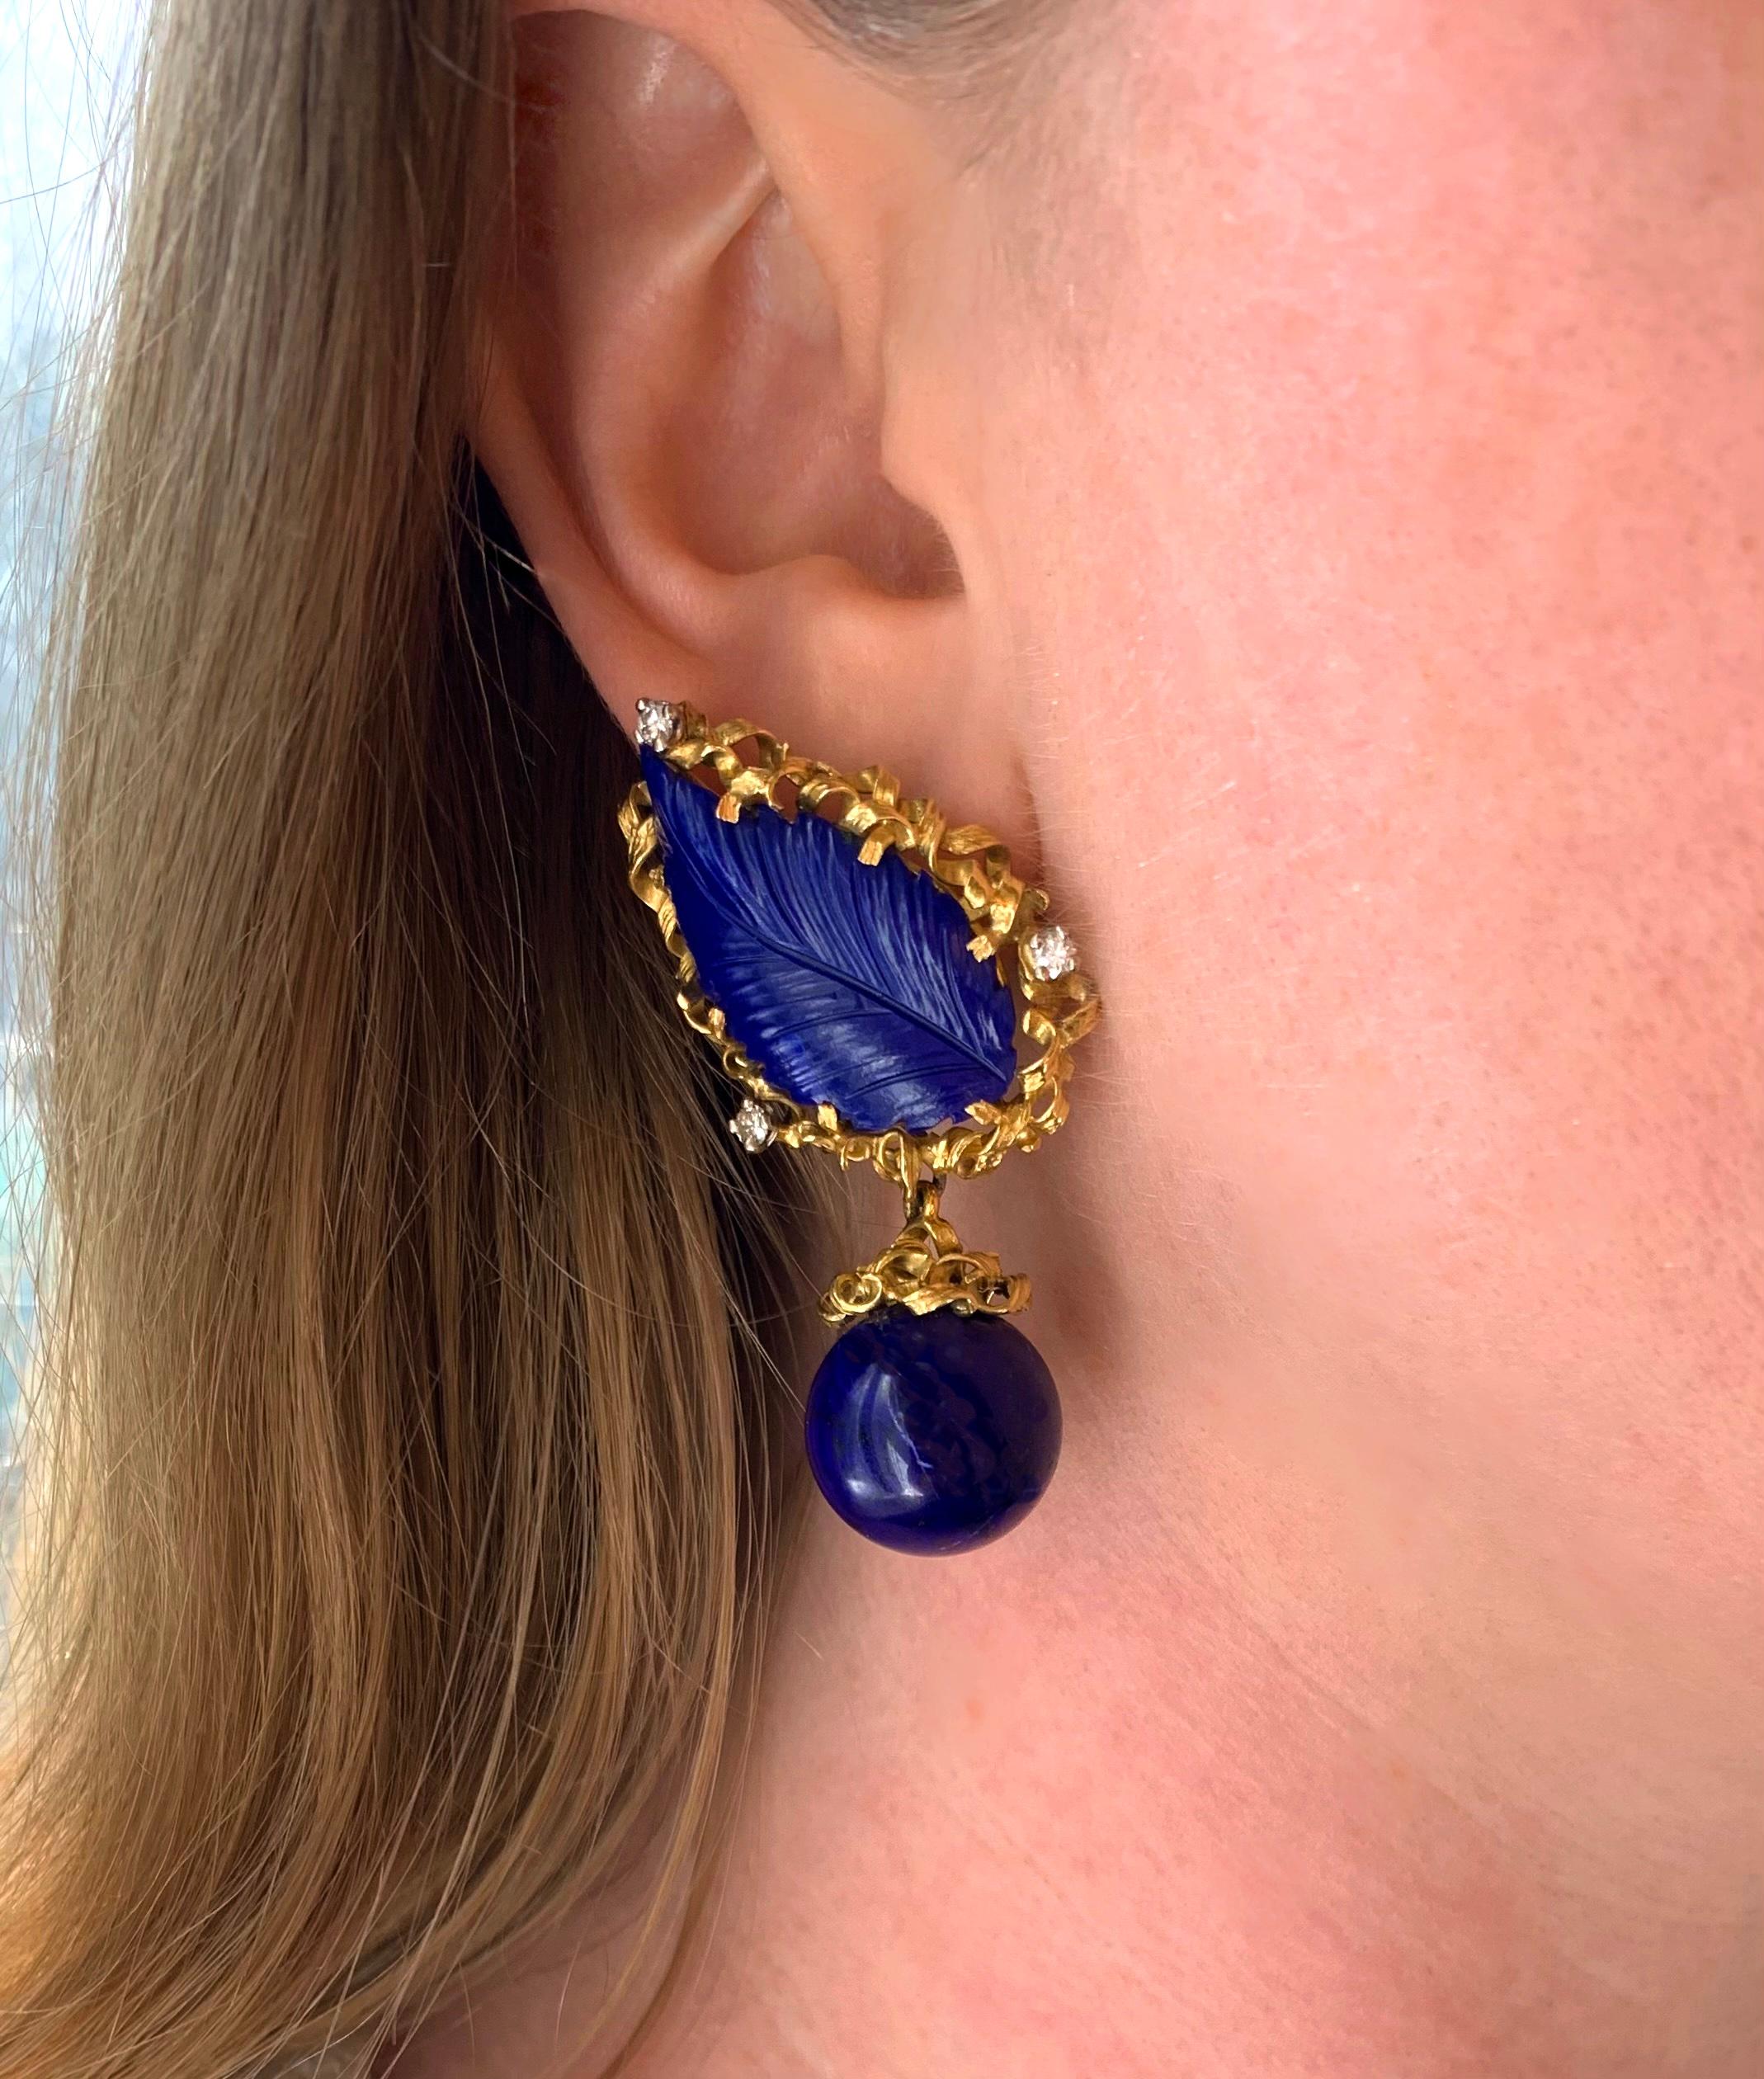 A very fine pair of day to night lapis lazuli, diamond and 18 karat yellow gold earrings, circa 1975 which can be worn during the day or transformed for a night out.

This pair of stunning dangle earrings have a beautifully carved deep-hued lapis